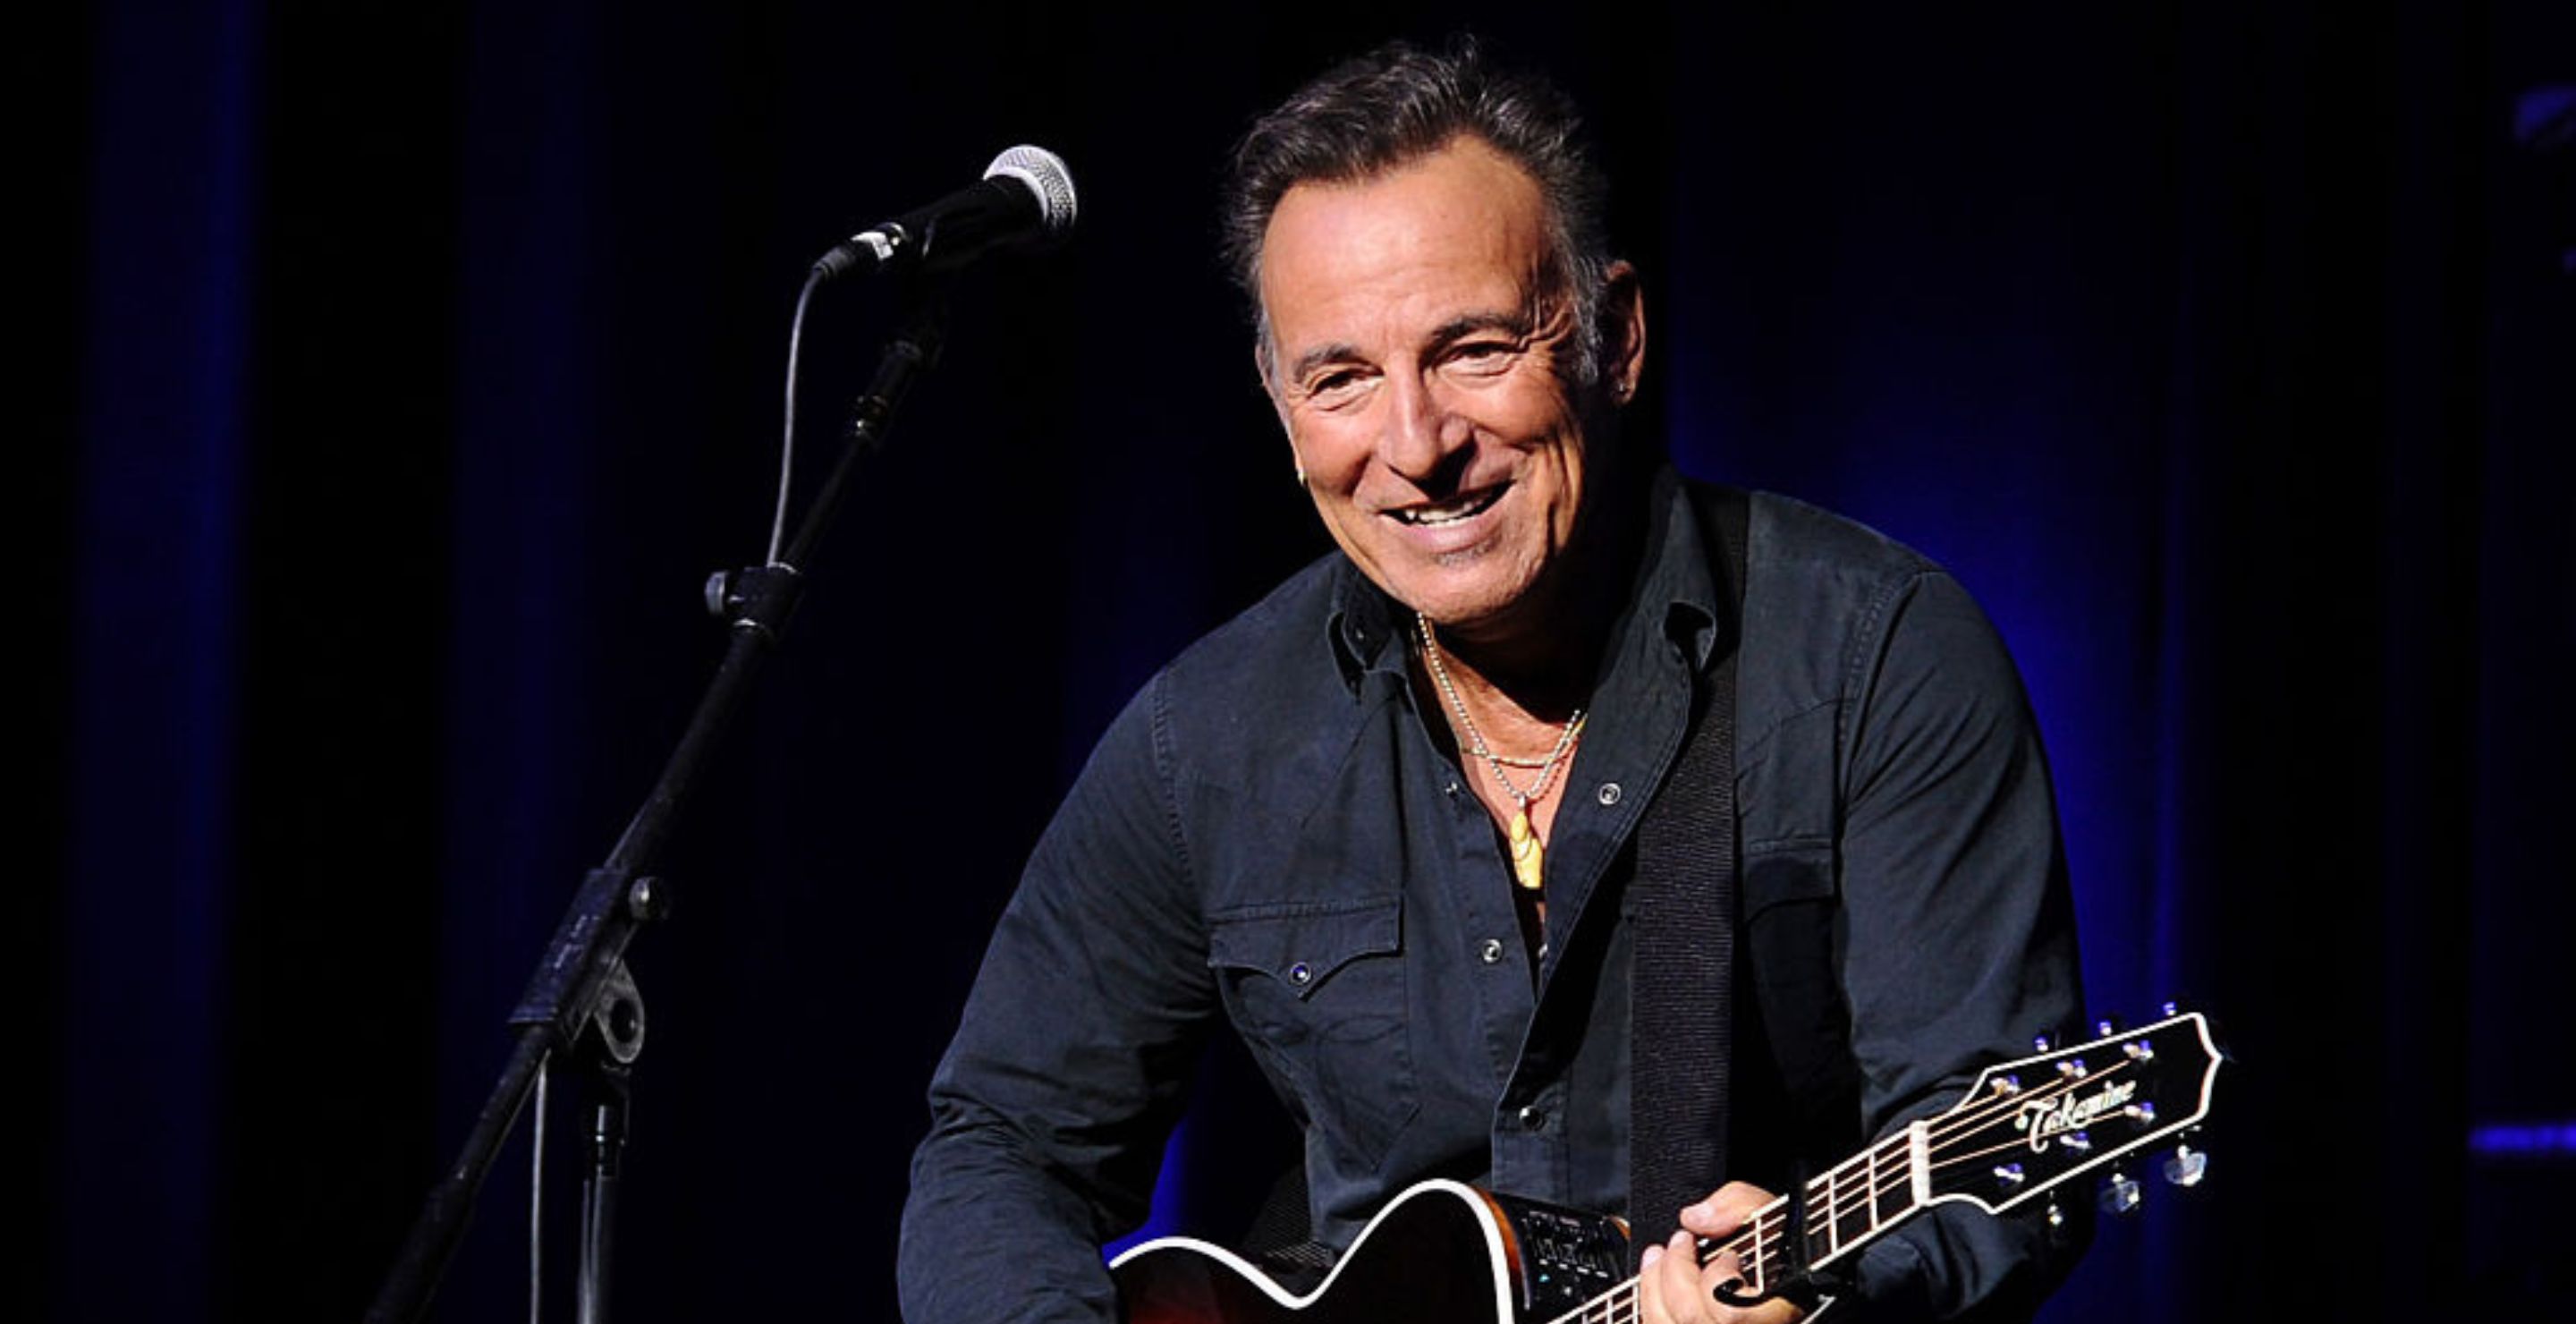 This Actor Has No Idea Who Bruce Springsteen Is Despite Meeting And Taking A Photo With Him